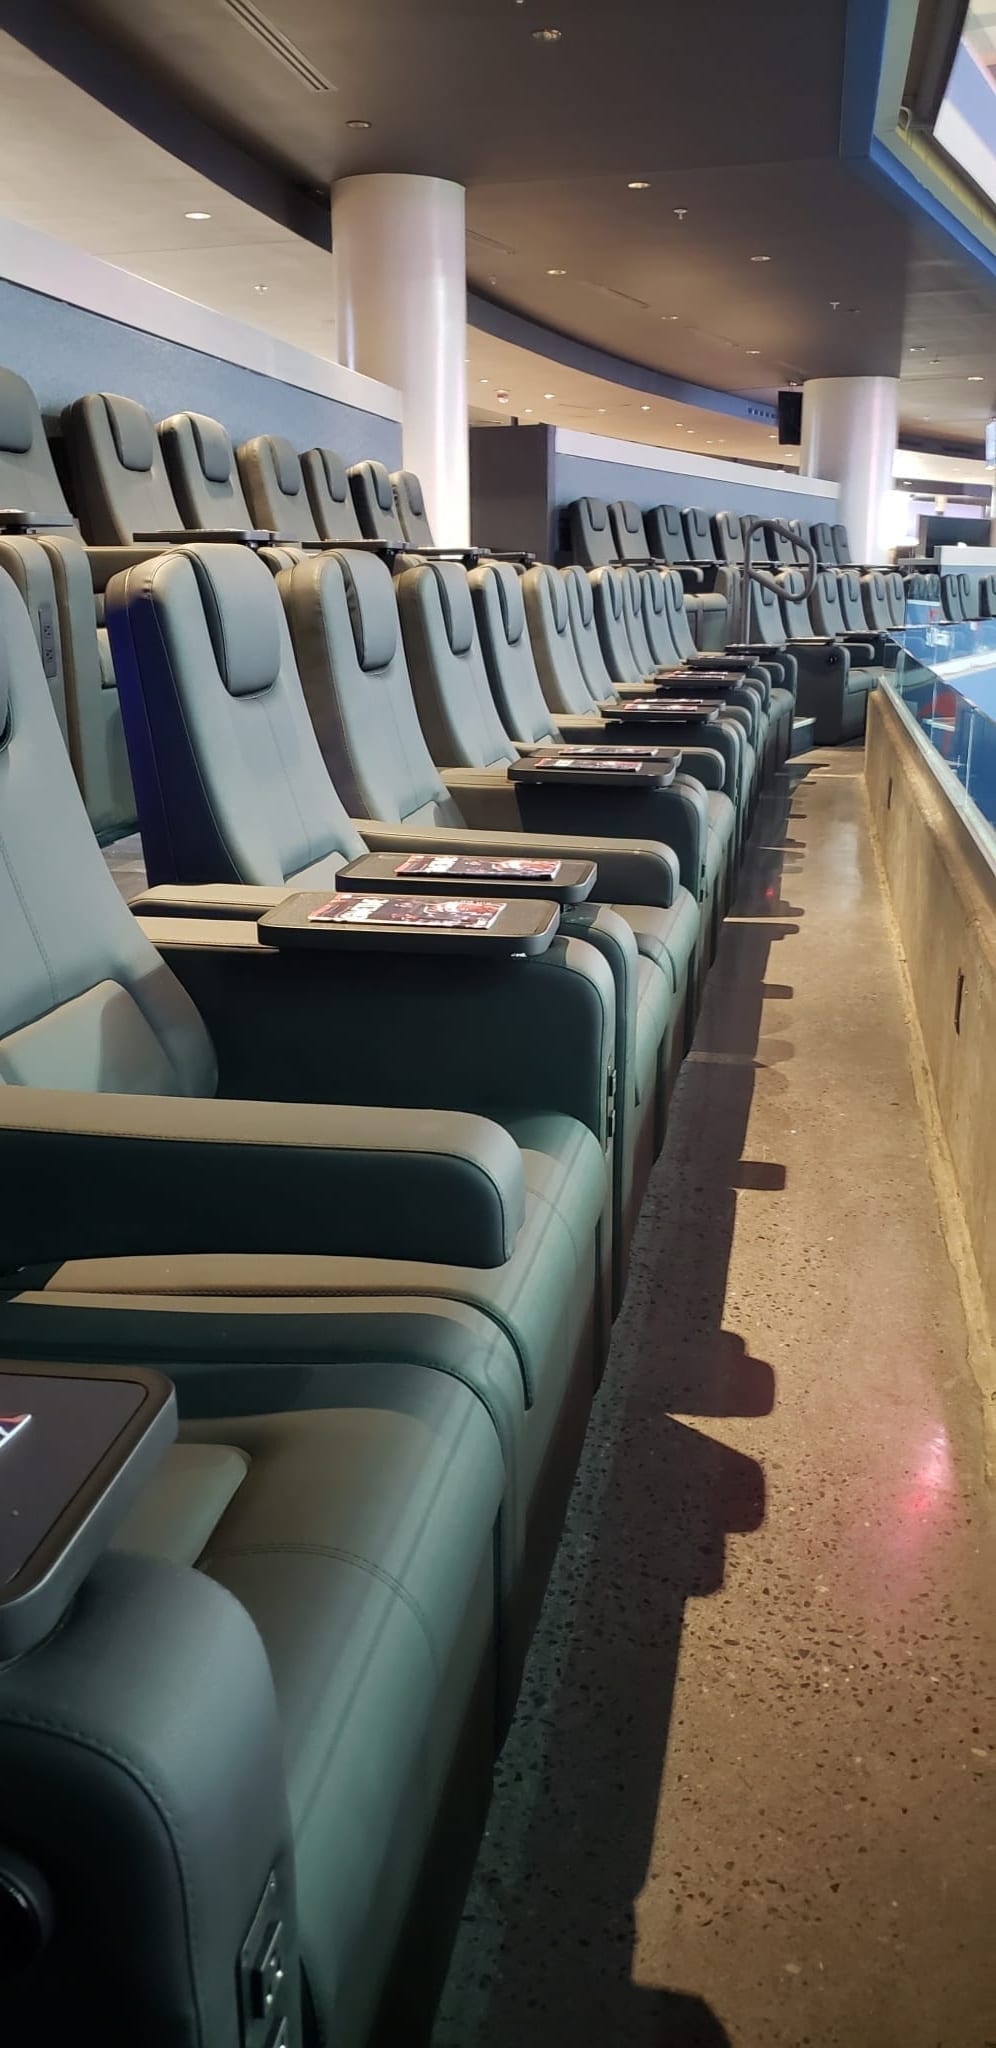 Fixed Seating Installation at Capital One Arena in Washington DC